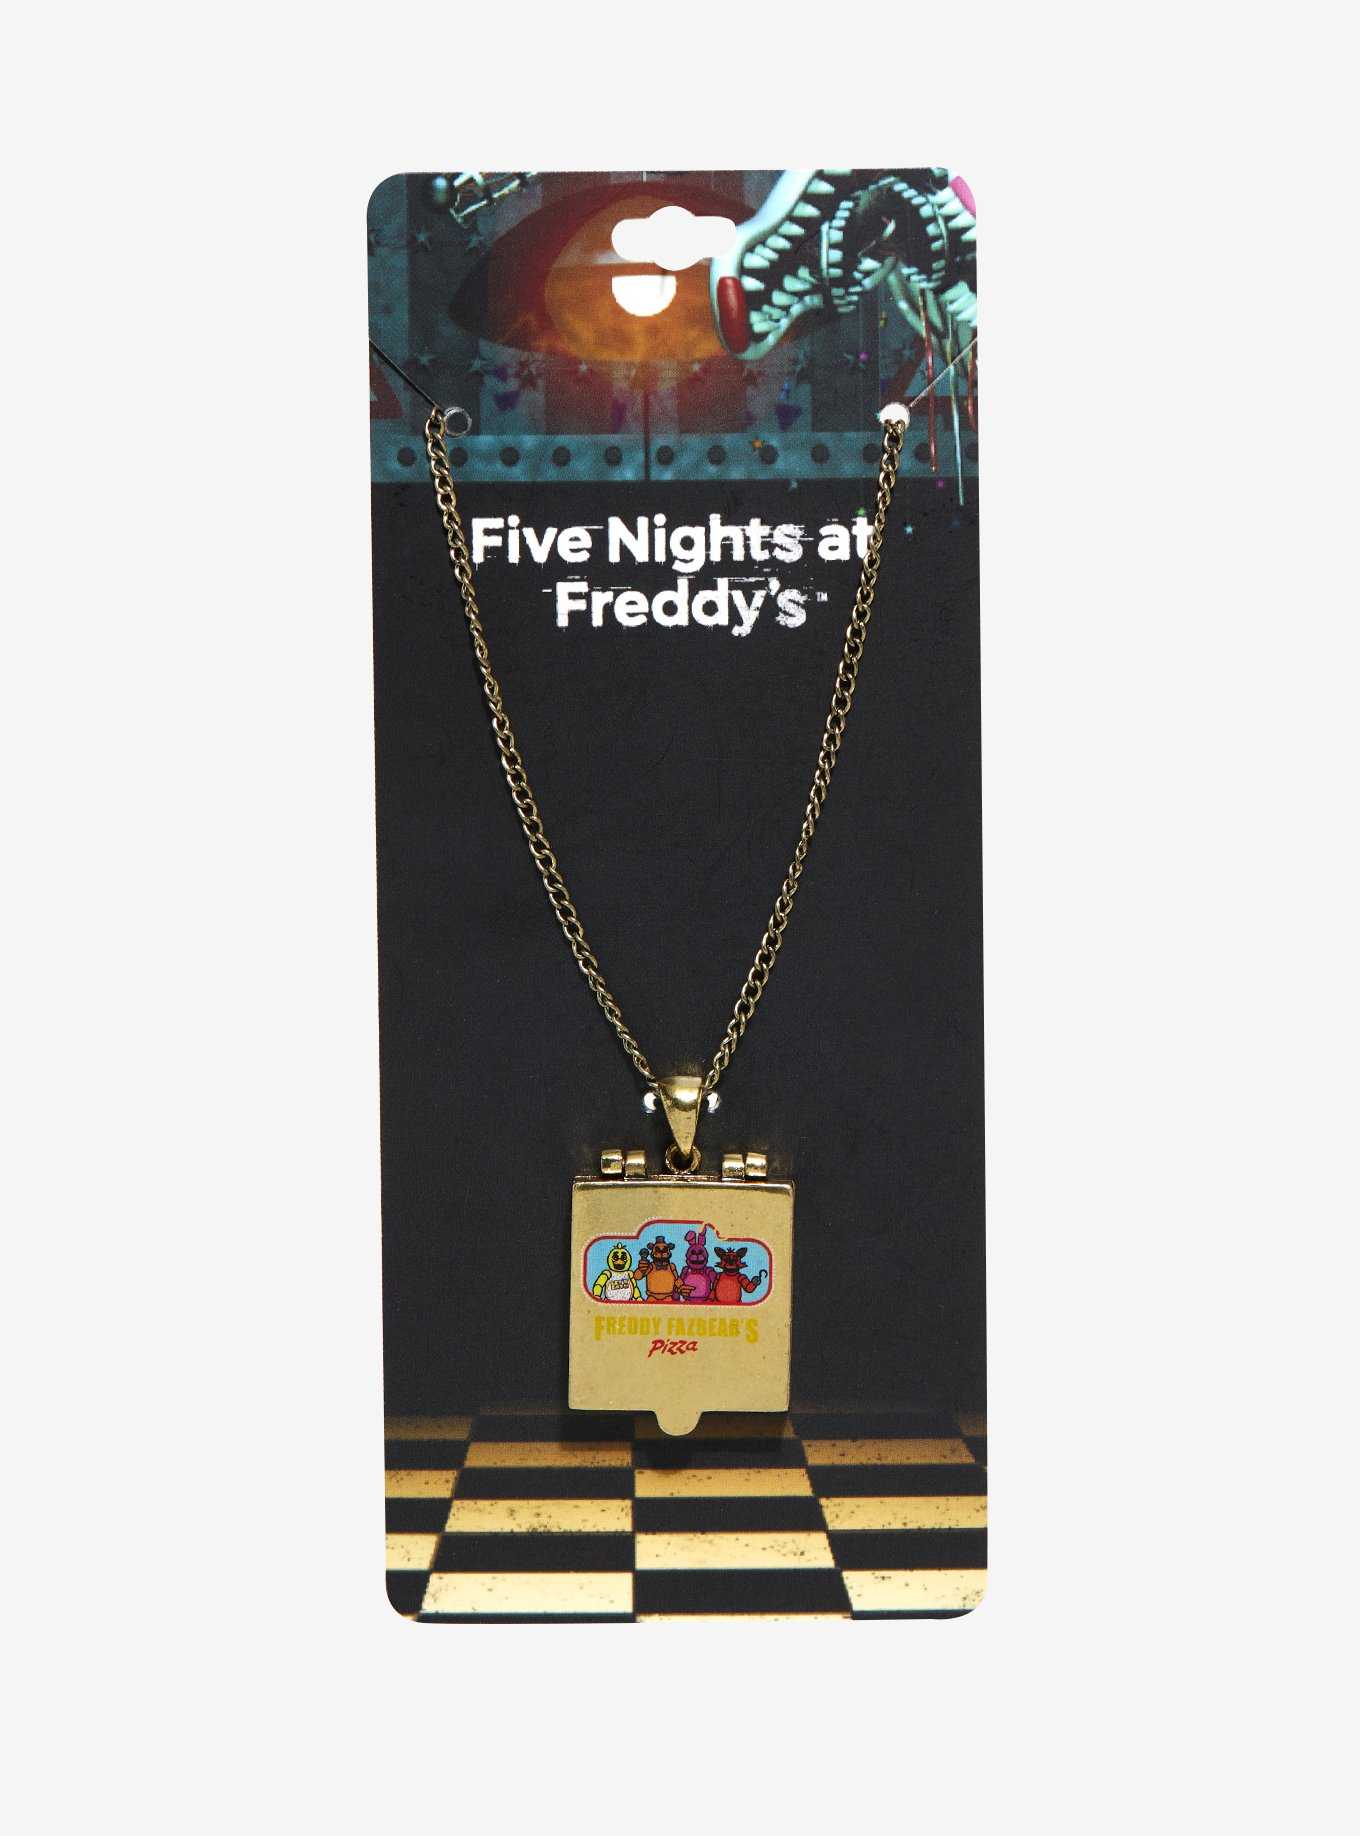 12 FNAF B/P MEDALS NECKLACES, birthday party favors FIVE NIGHTS AT